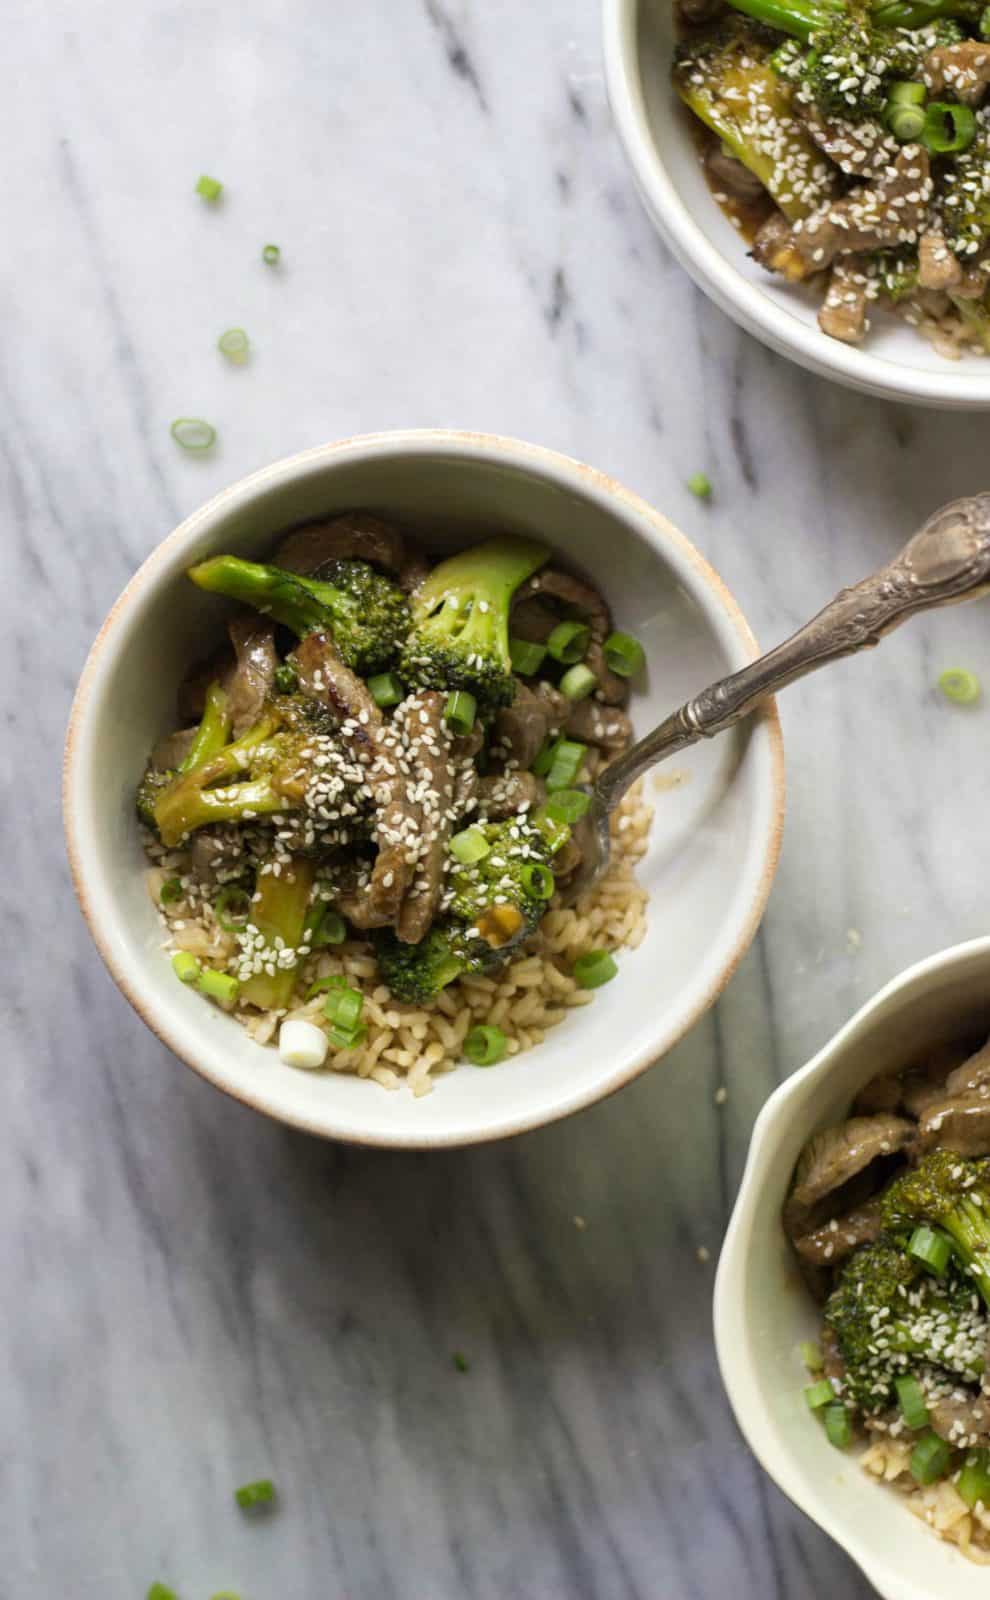 Restaurant-Style Beef & Broccoli in bowls.